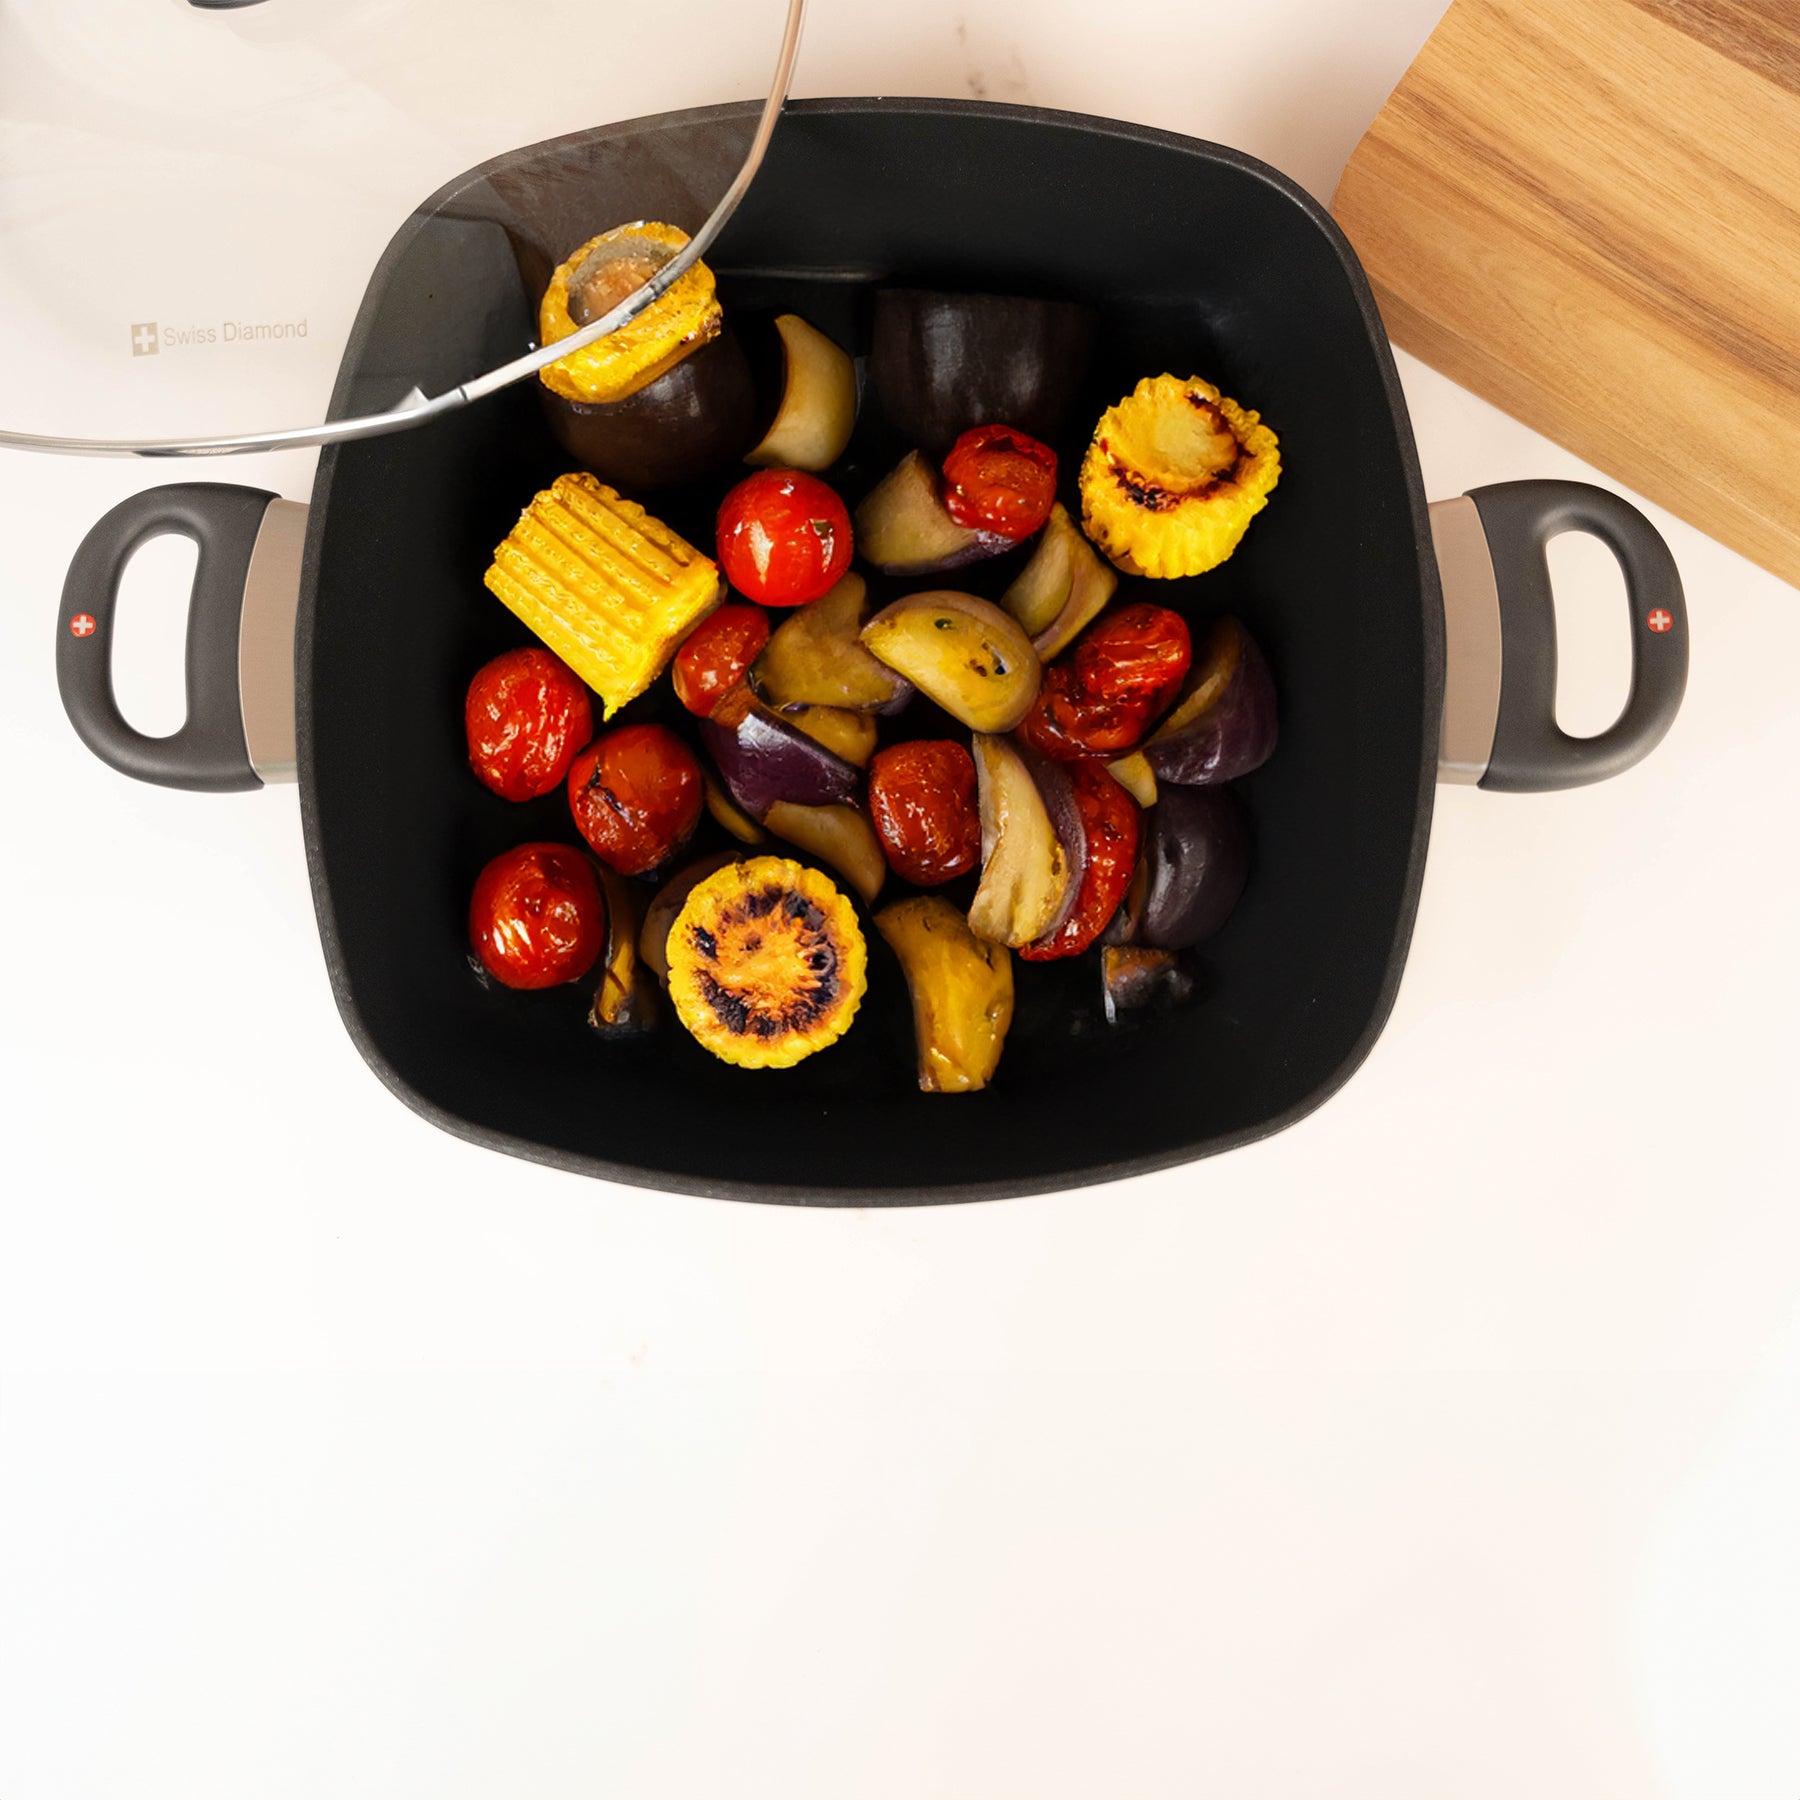 XD Nonstick 5 qt Square Casserole with Glass Lid in use with food inside